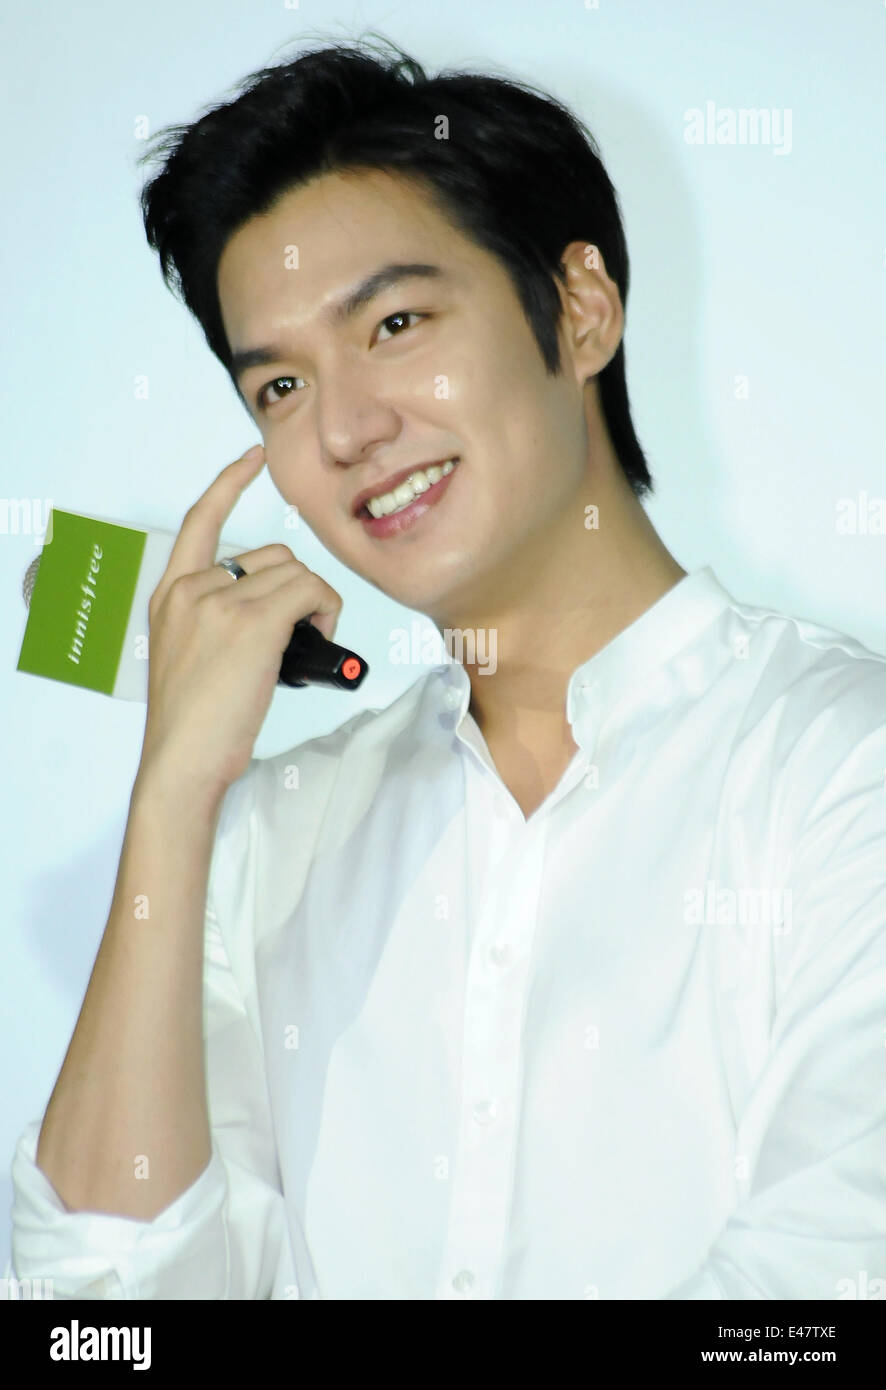 Taipei. 5th July, 2014. South Korean actor Lee Min-ho attends a press conference in Taipei, southeast China's Taiwan, July 4, 2014. © Xinhua/Alamy Live News Stock Photo